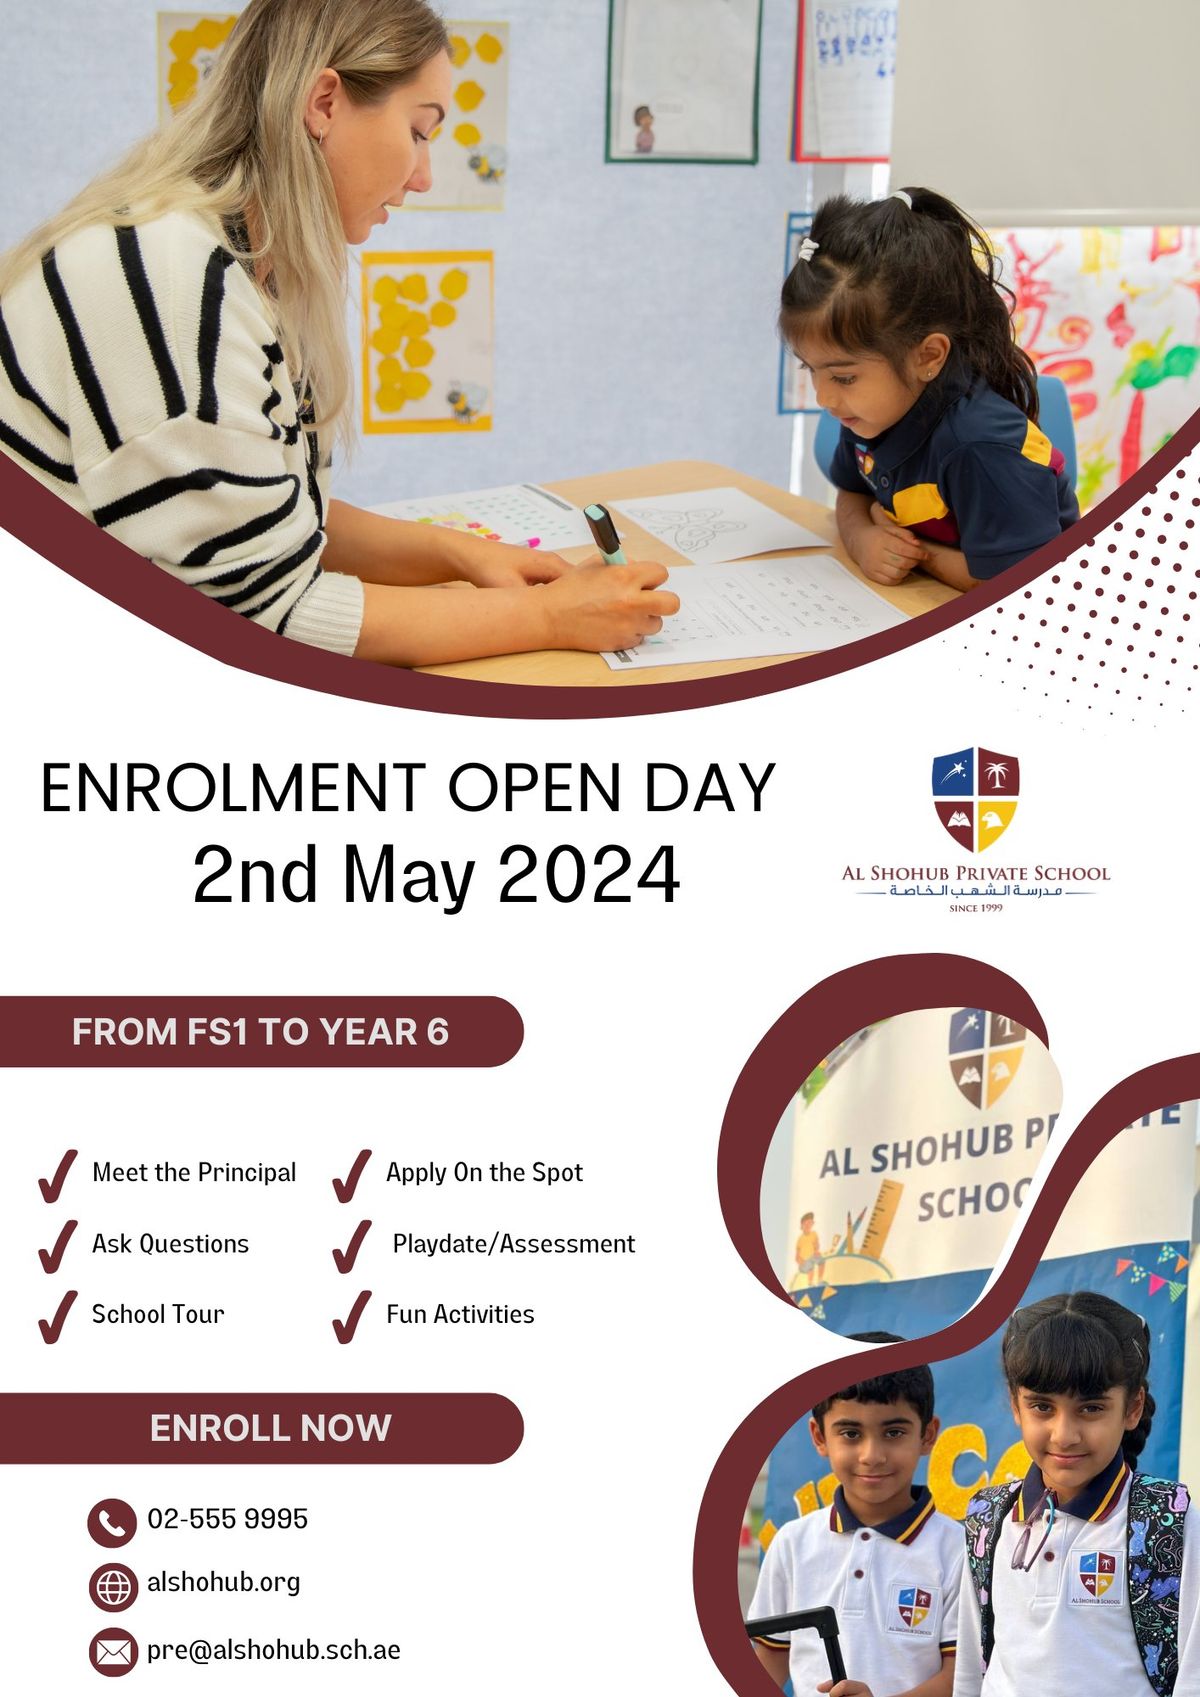 ENROLMENT OPEN DAY - From FS1 TO YEAR 6